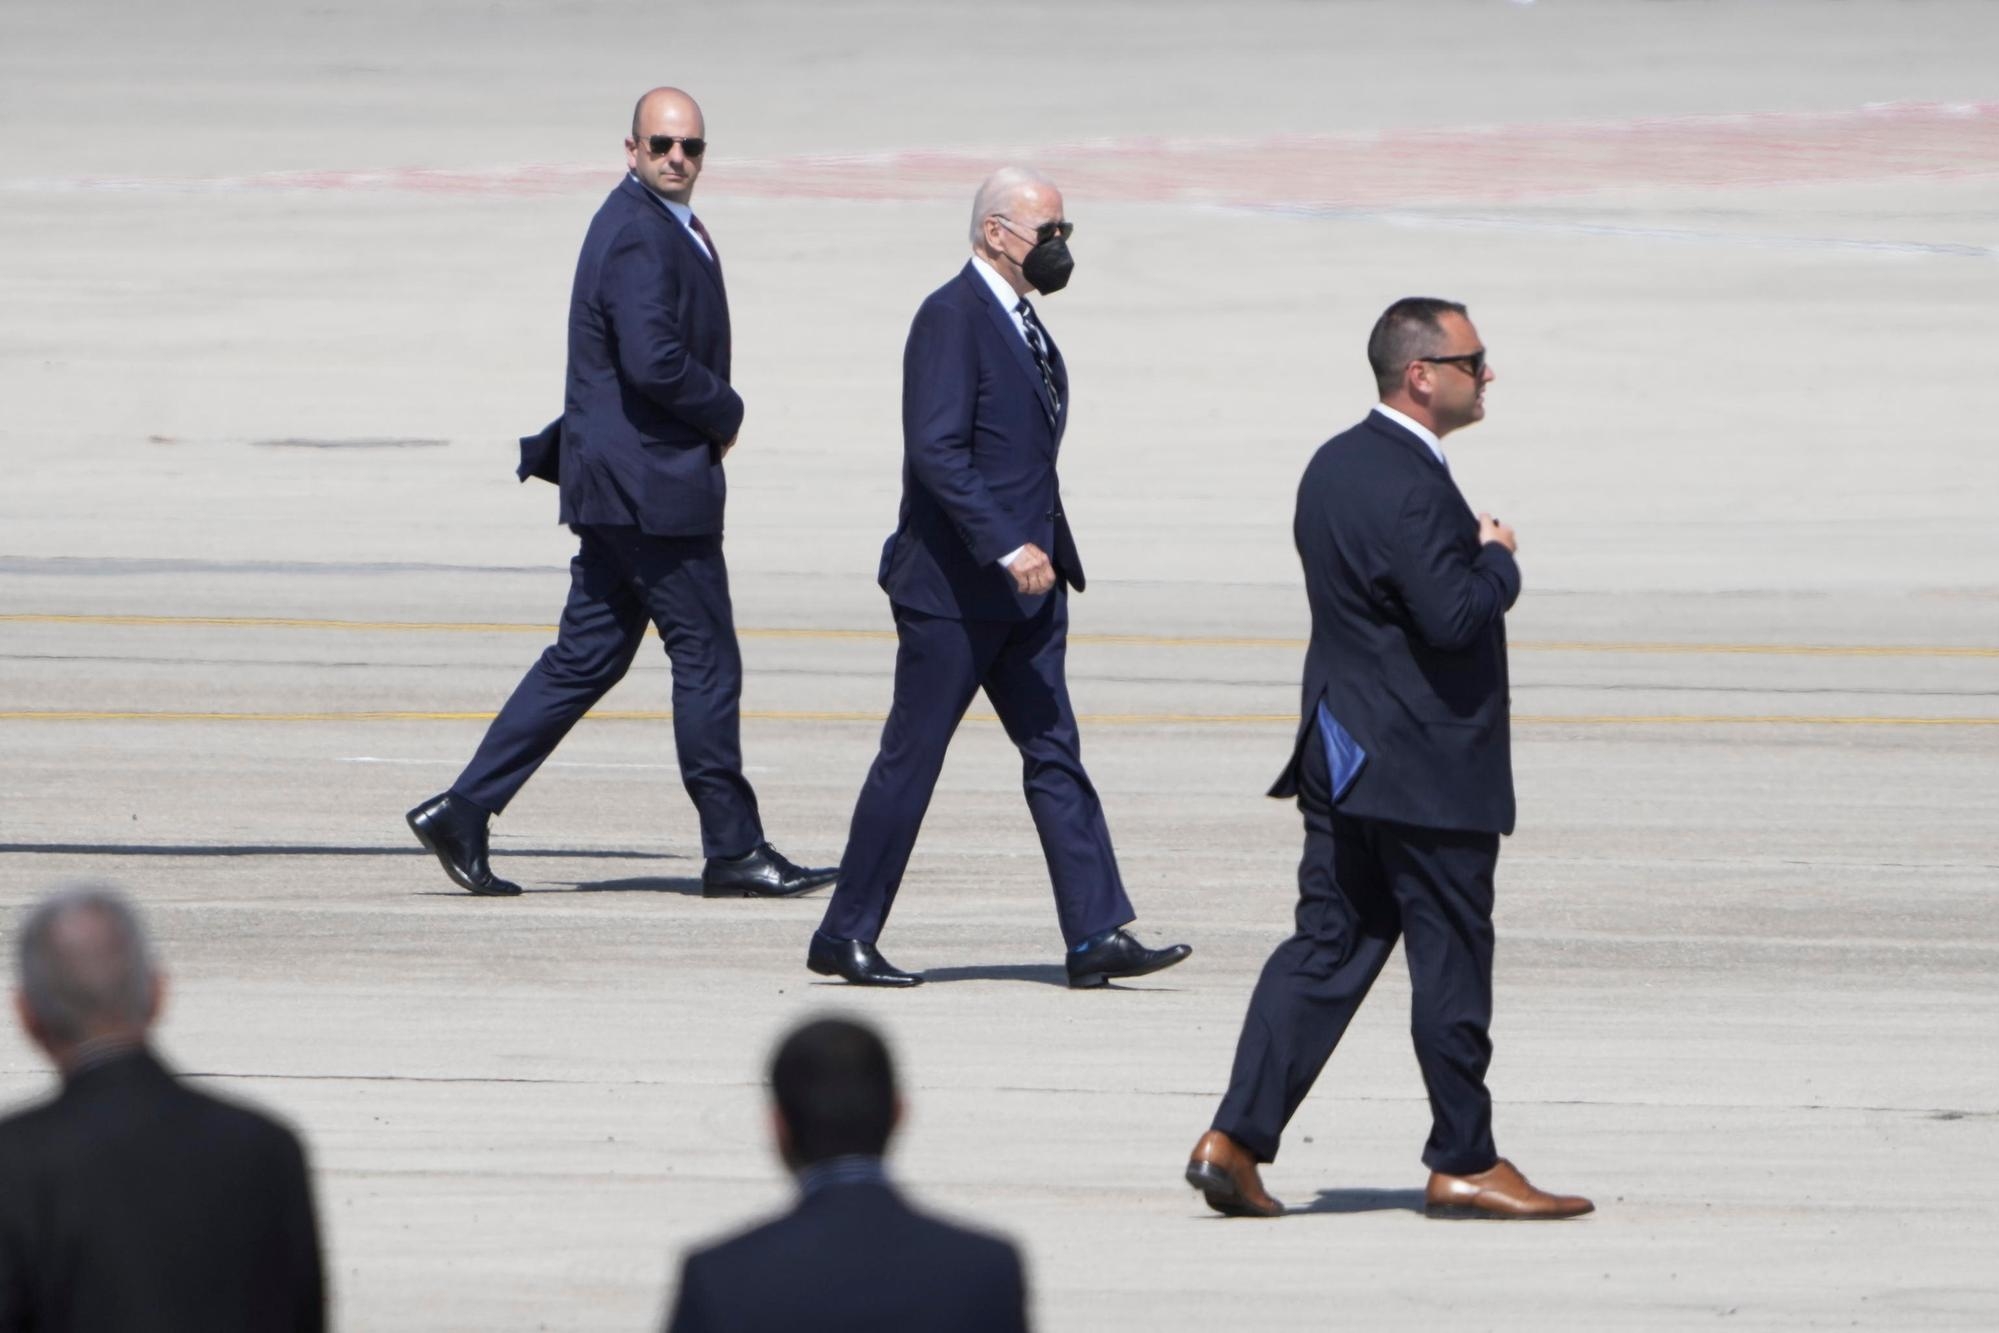 epa10072575 U.S. President Joe Biden wearing a face mask walks towards the Air Force One as he departs from Israel to Saudi Arabia from Ben Gurion airport in Lod near Tel Aviv, Israel, 15 July 2022. US president is to fly to Saudi Arabia after an official visit to Israel and the Palestinian Authority, as part of his Middle East trip. EPA/ARIEL SCHALIT / POOL